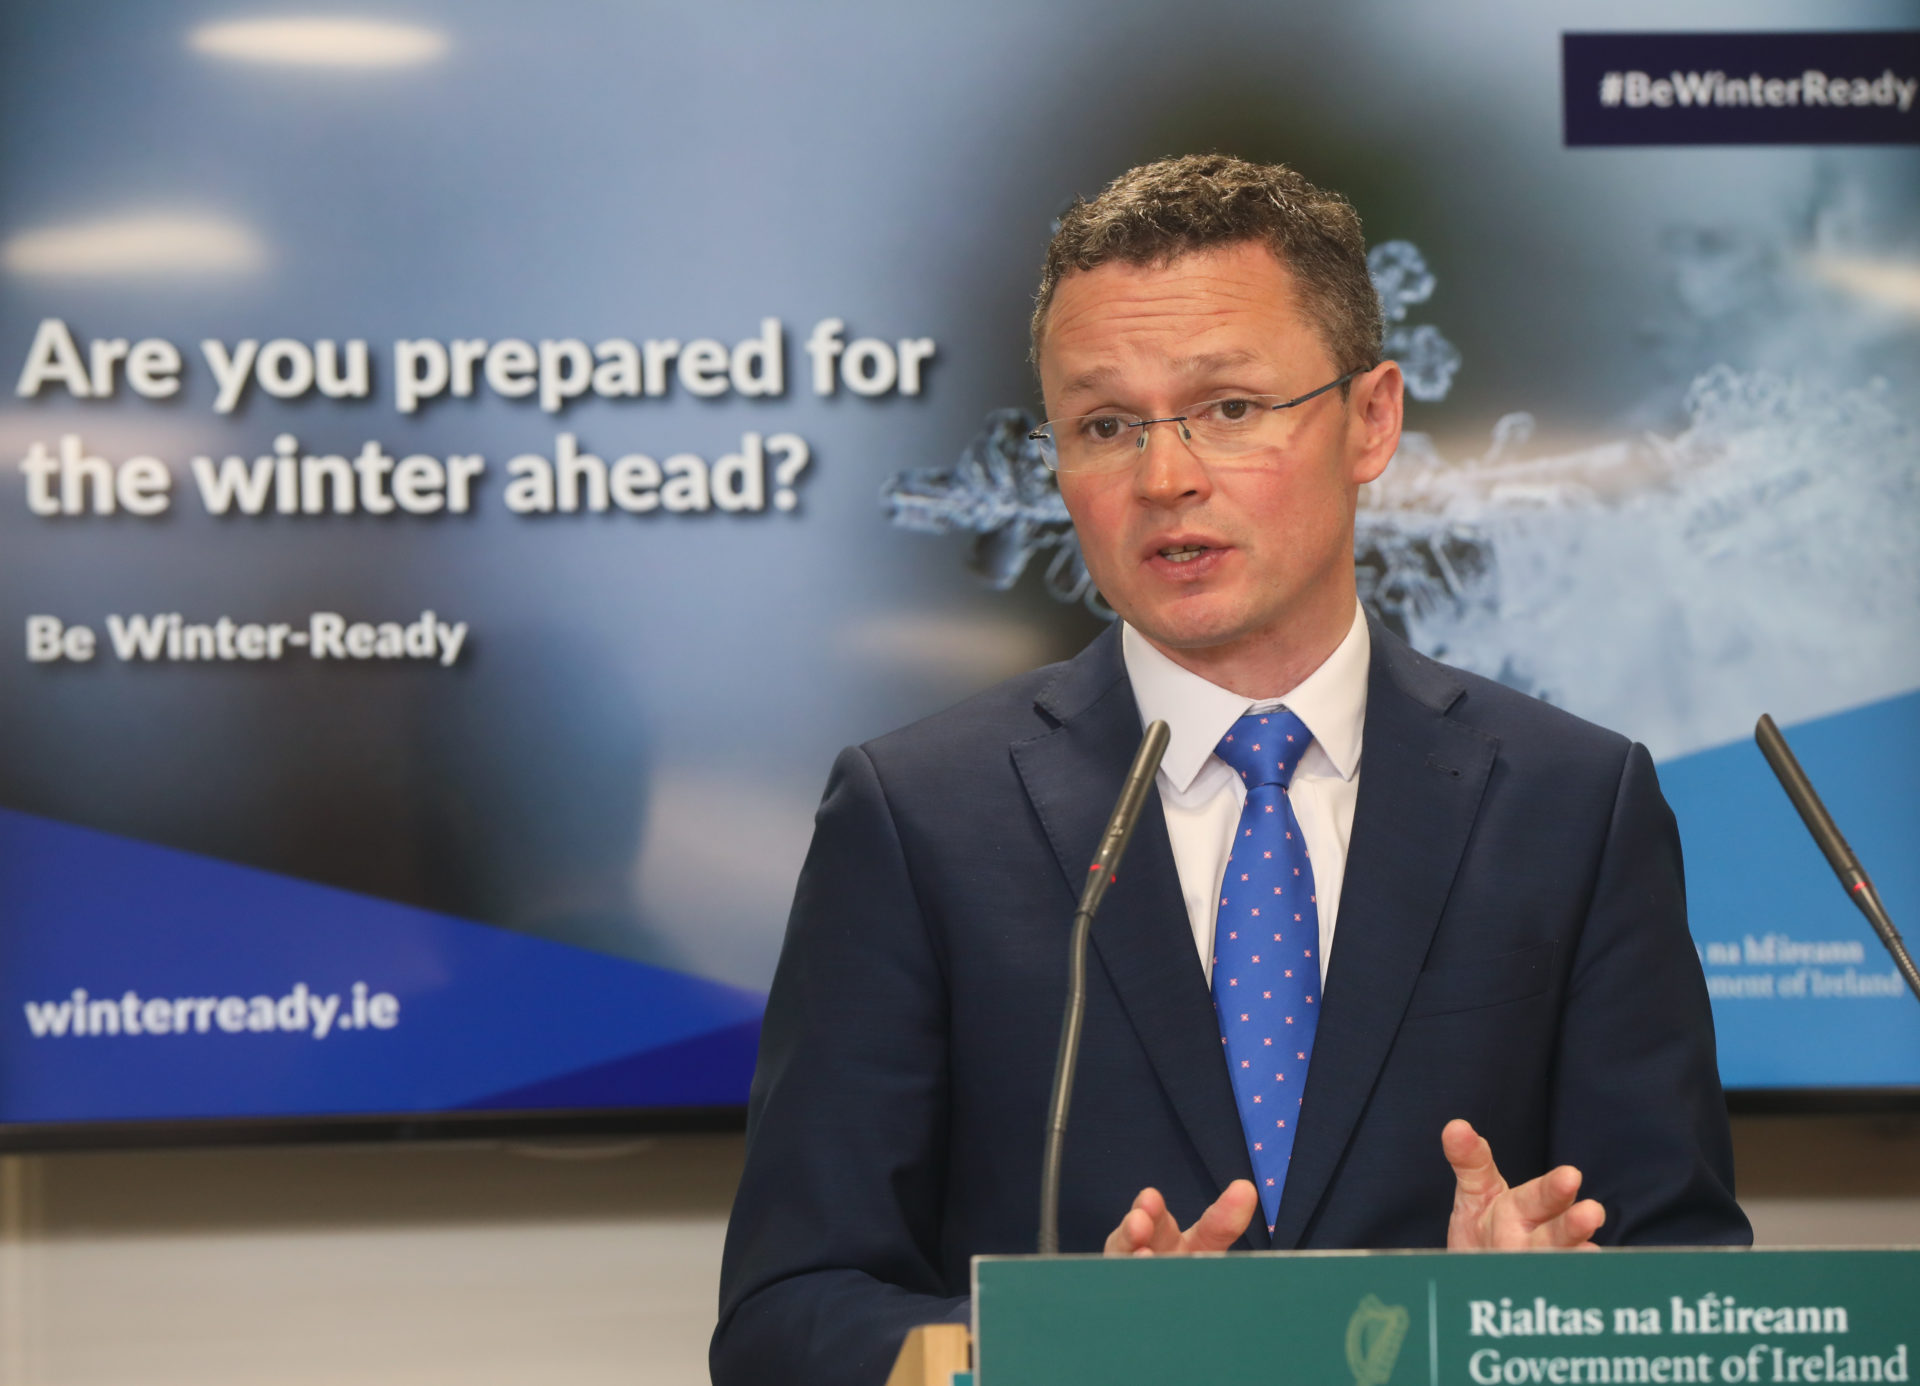 10/11/2022 Pictured is Minister of State with responsibility for the Office of Public Works Patrick O'Donovan speaking at the launch of the Be Winter Ready campaign 2022-23 in the National Emergency Coordination Centre (NECC), Dublin. Photograph: Leah Farrell / RollingNews.ie